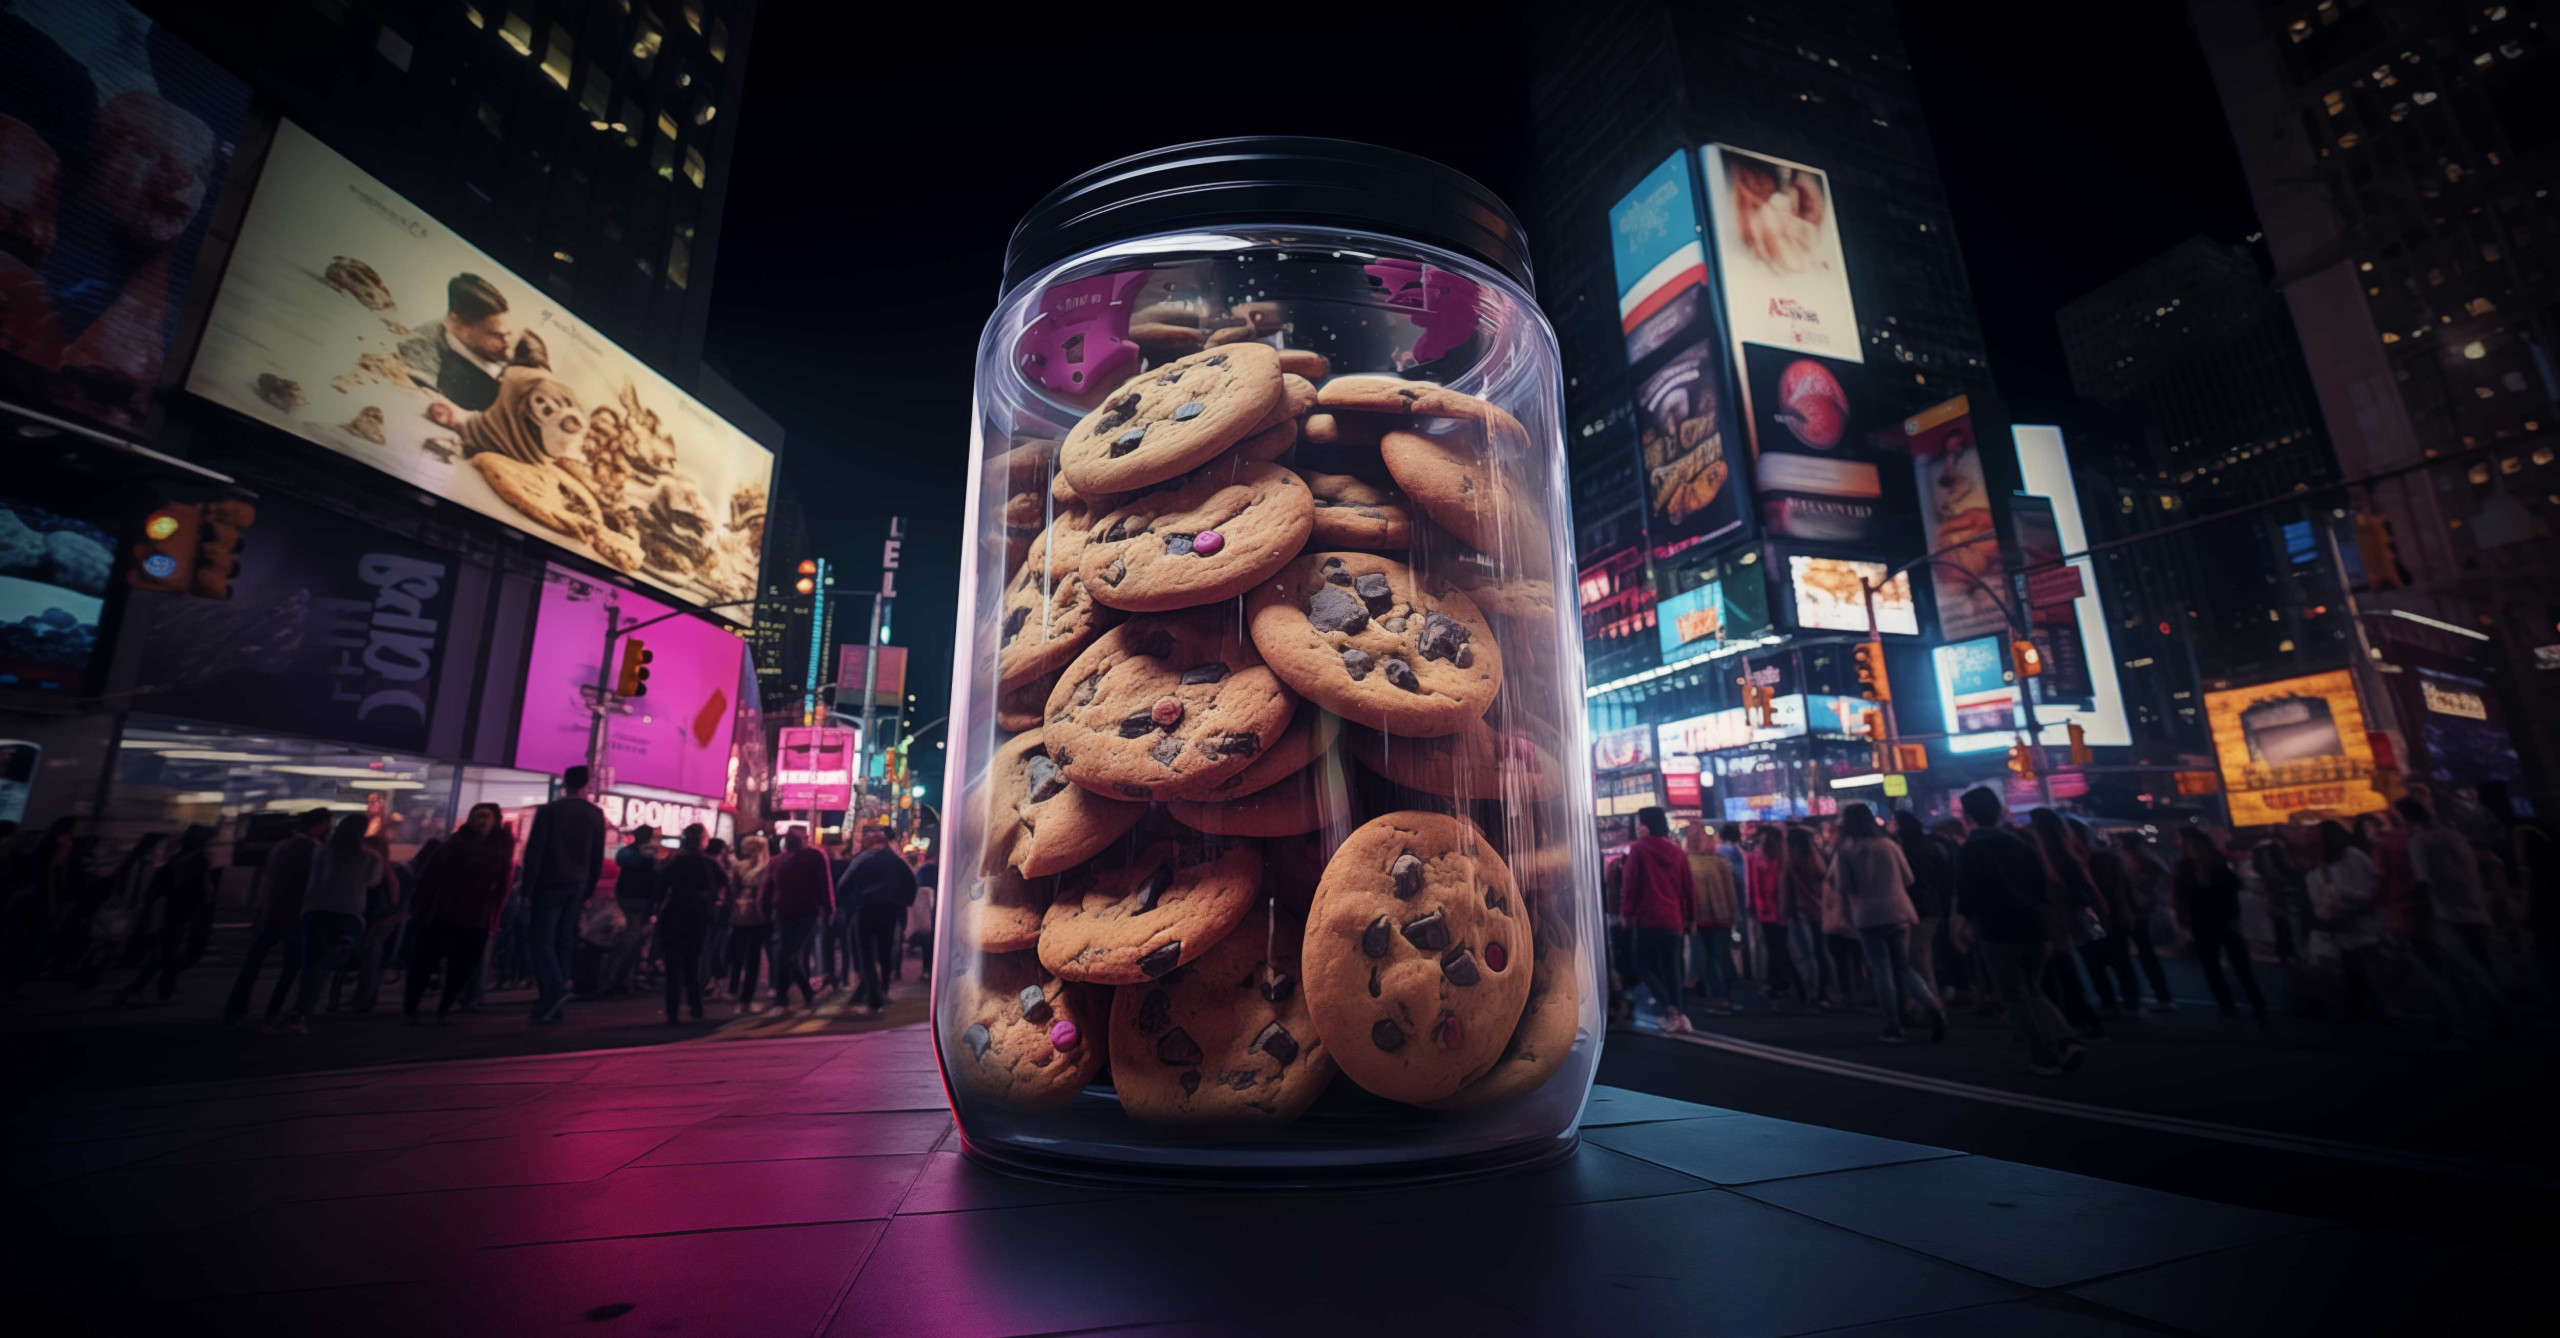 The digital advertising landscape is undergoing a significant shift with the restriction of third-party cookies.